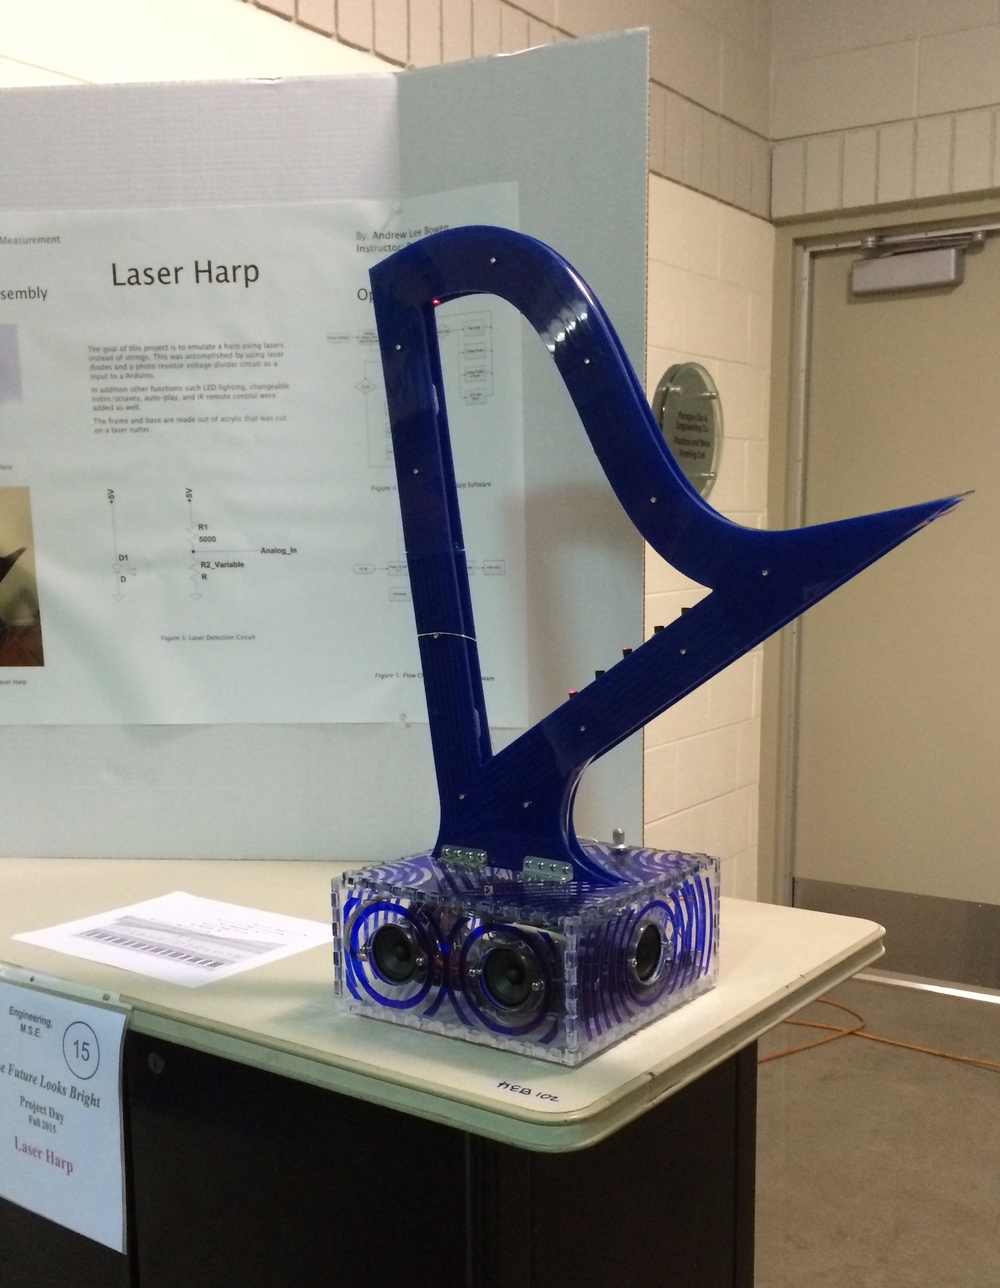 Laser Harp and Museum Beacon System Teams Win People's Choice Award at Project Day